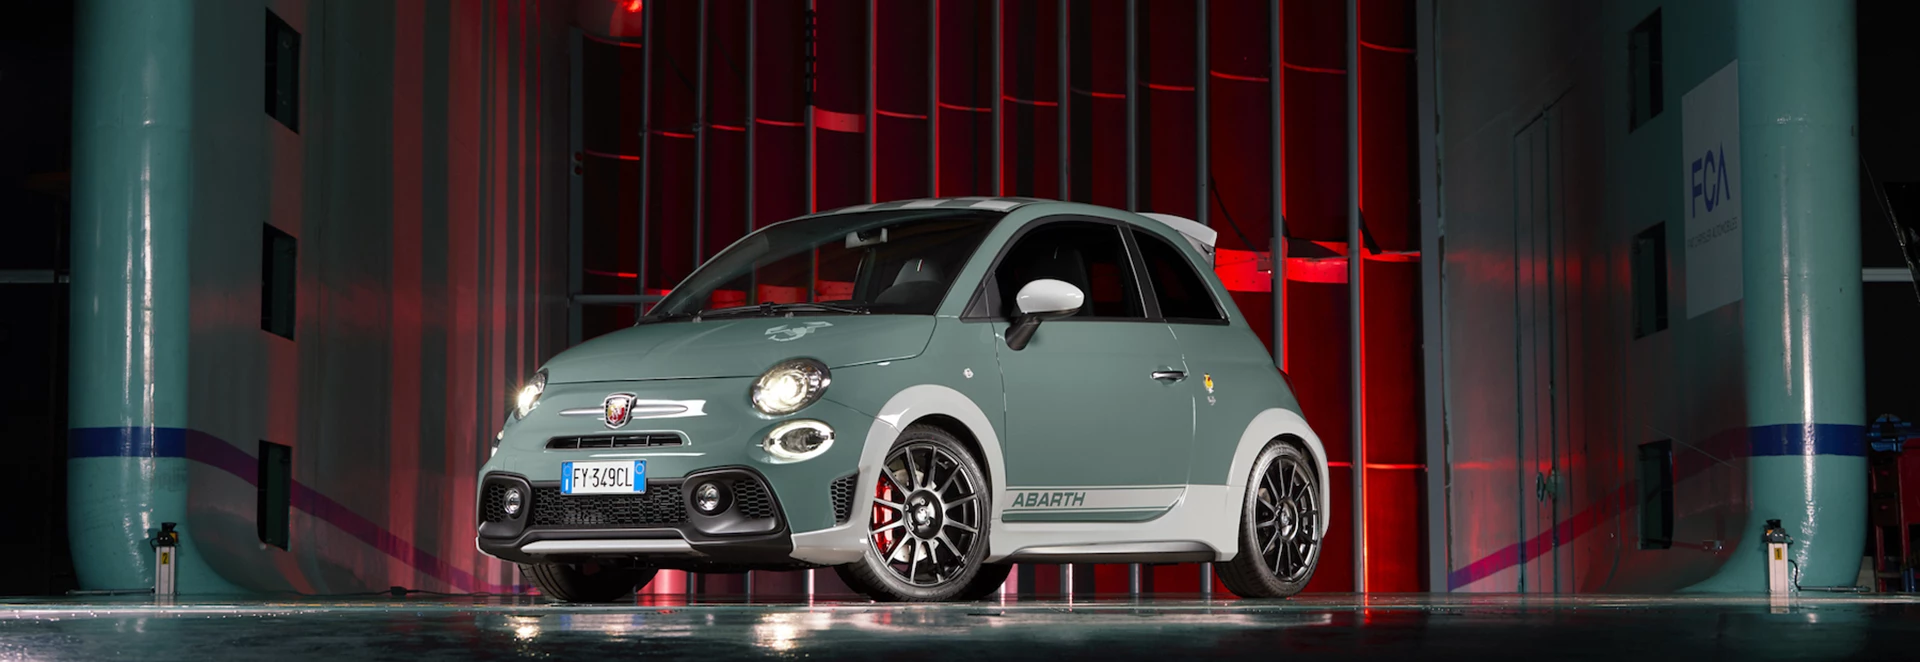 Abarth celebrates 70th anniversary with new special edition 695 